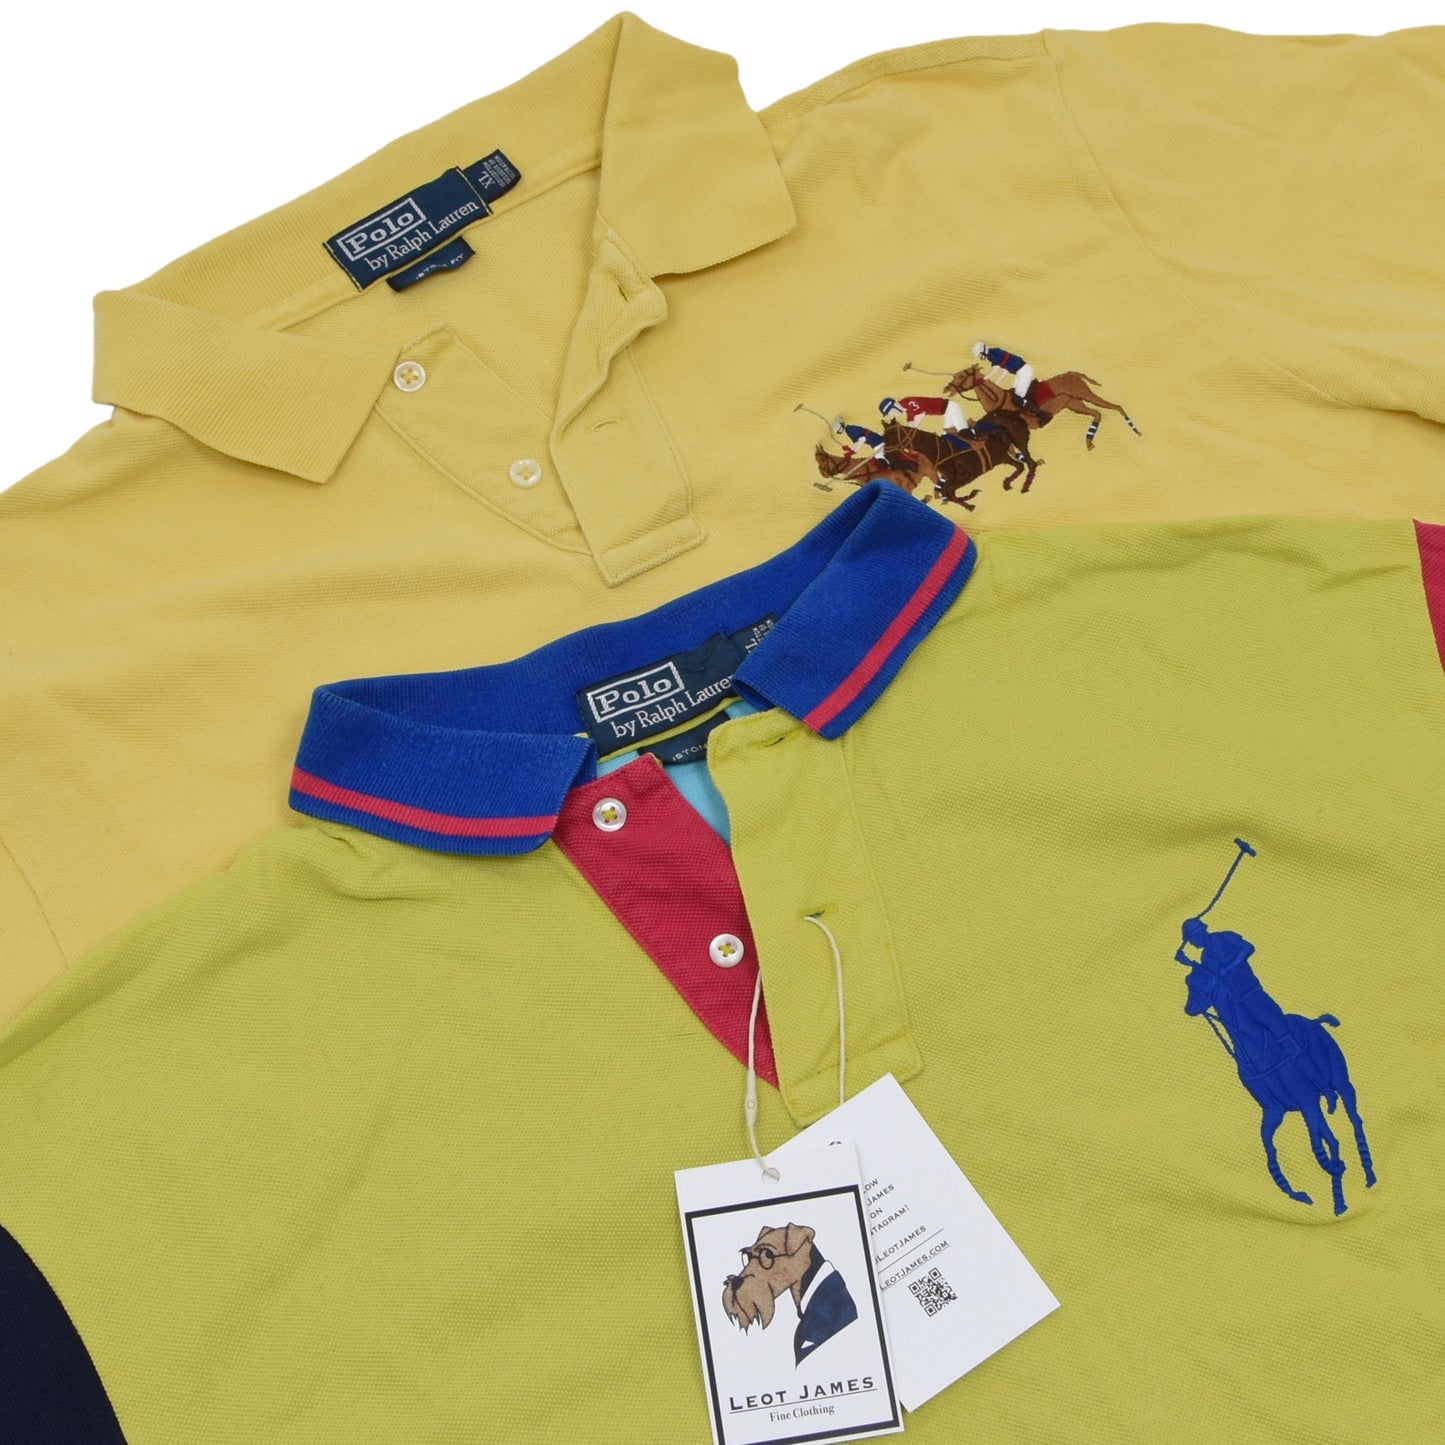 x2 Polo Ralph Lauren Polo Shirts Size XL Custom Fit - Yellow & Color Block